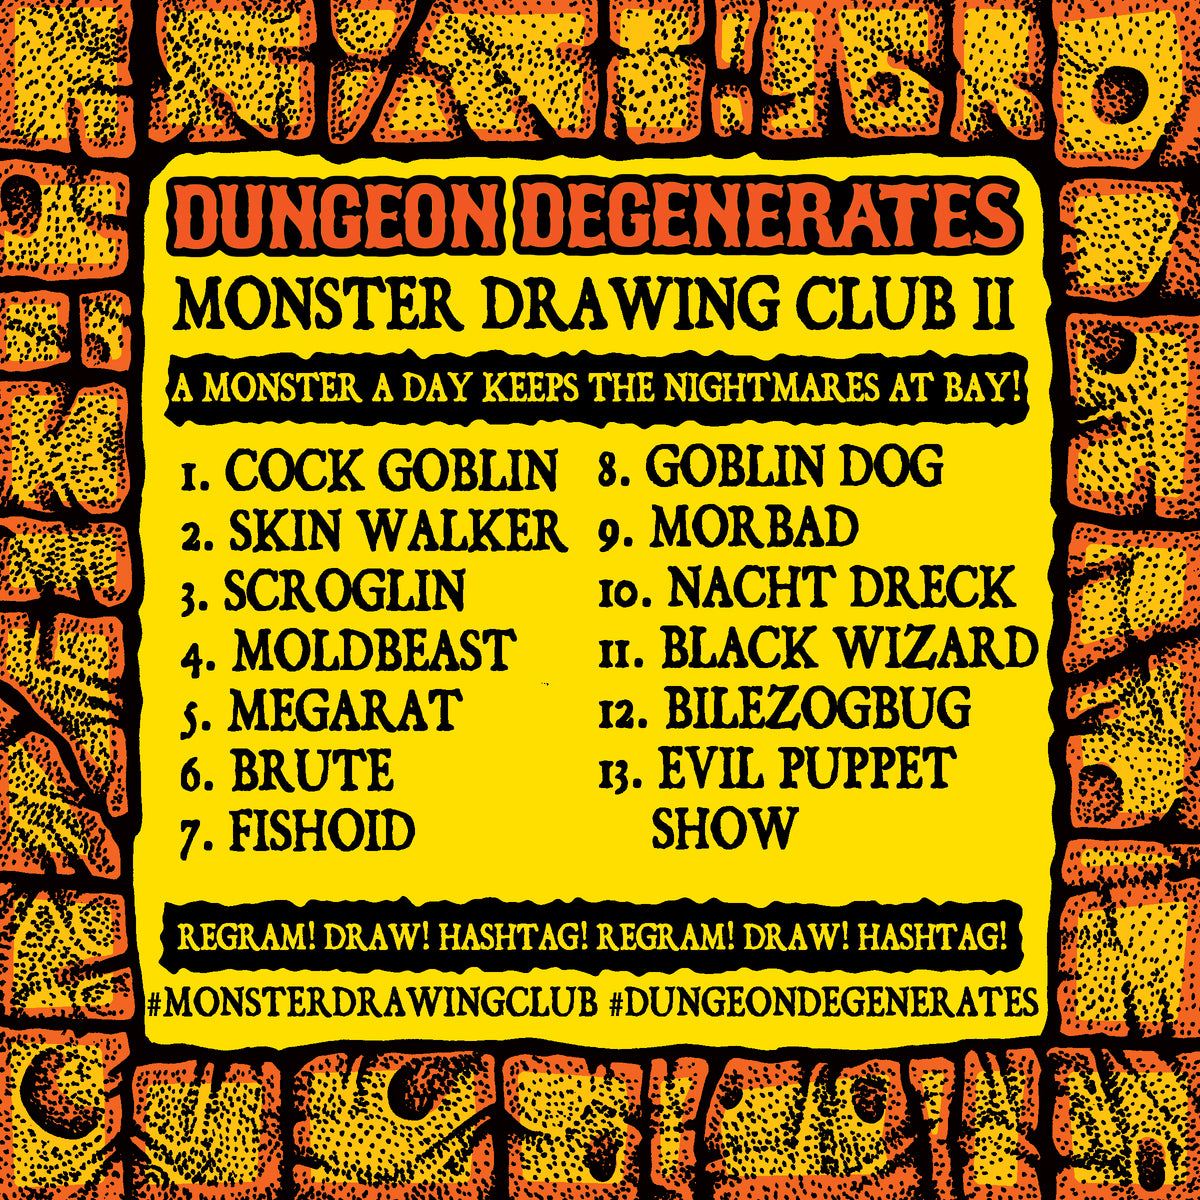 THE RETURN OF THE DUNGEON DEGENERATES MONSTER DRAWING CLUB!